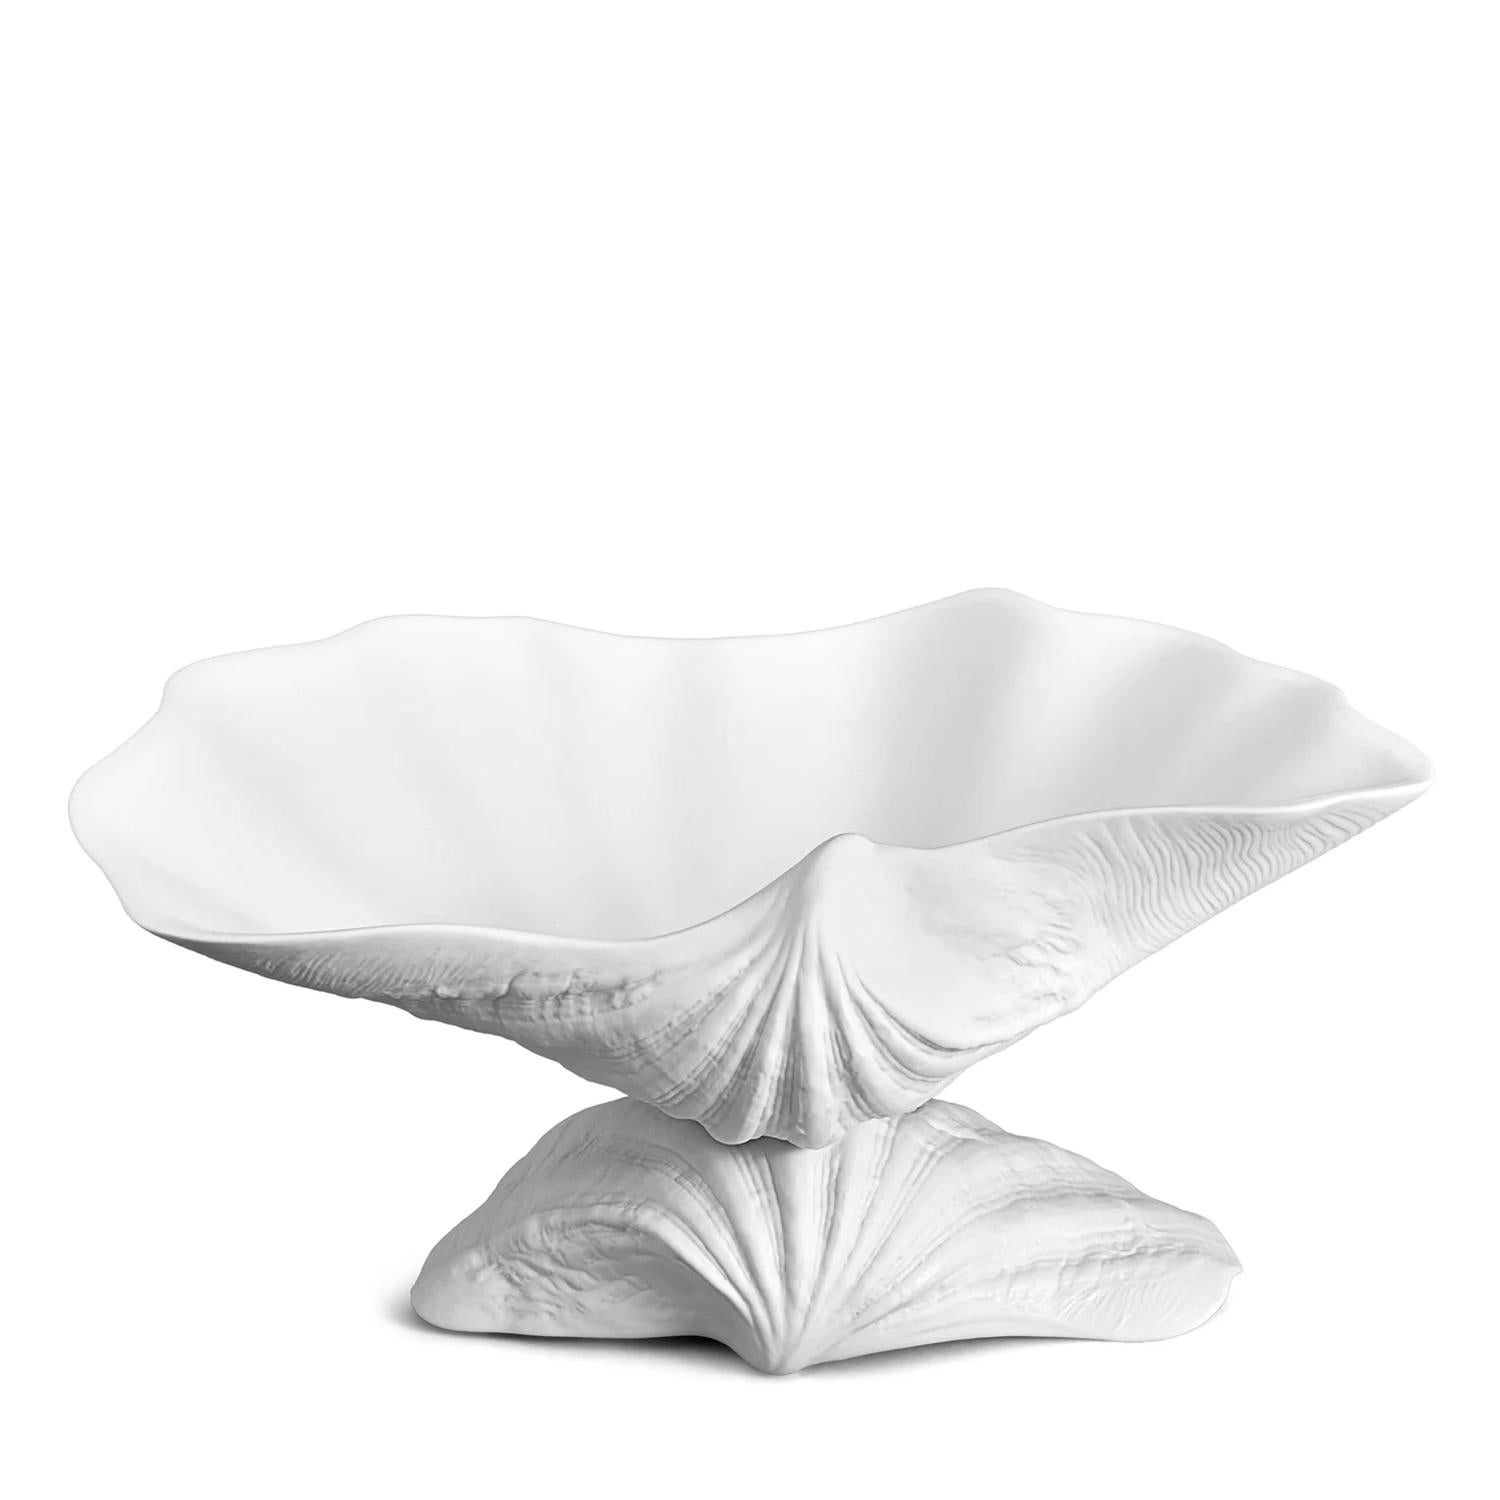 Dish Sea Shell Large with all structure in 
fine hand-crafted porcelain in white finish.
Delivered in luxury gift box.